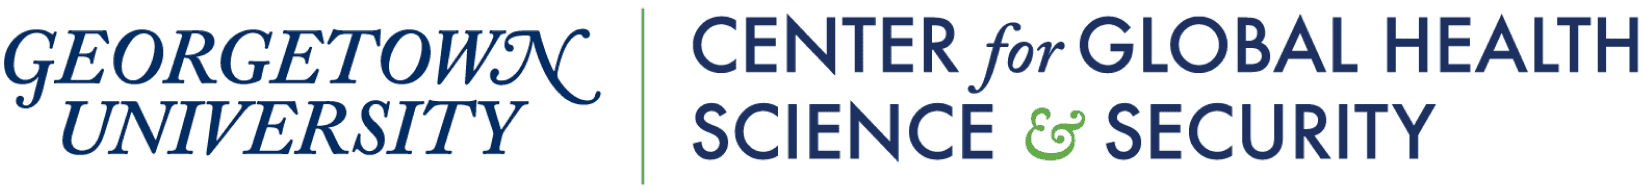 Georgetown University Center for Global Health Science and Security logo
